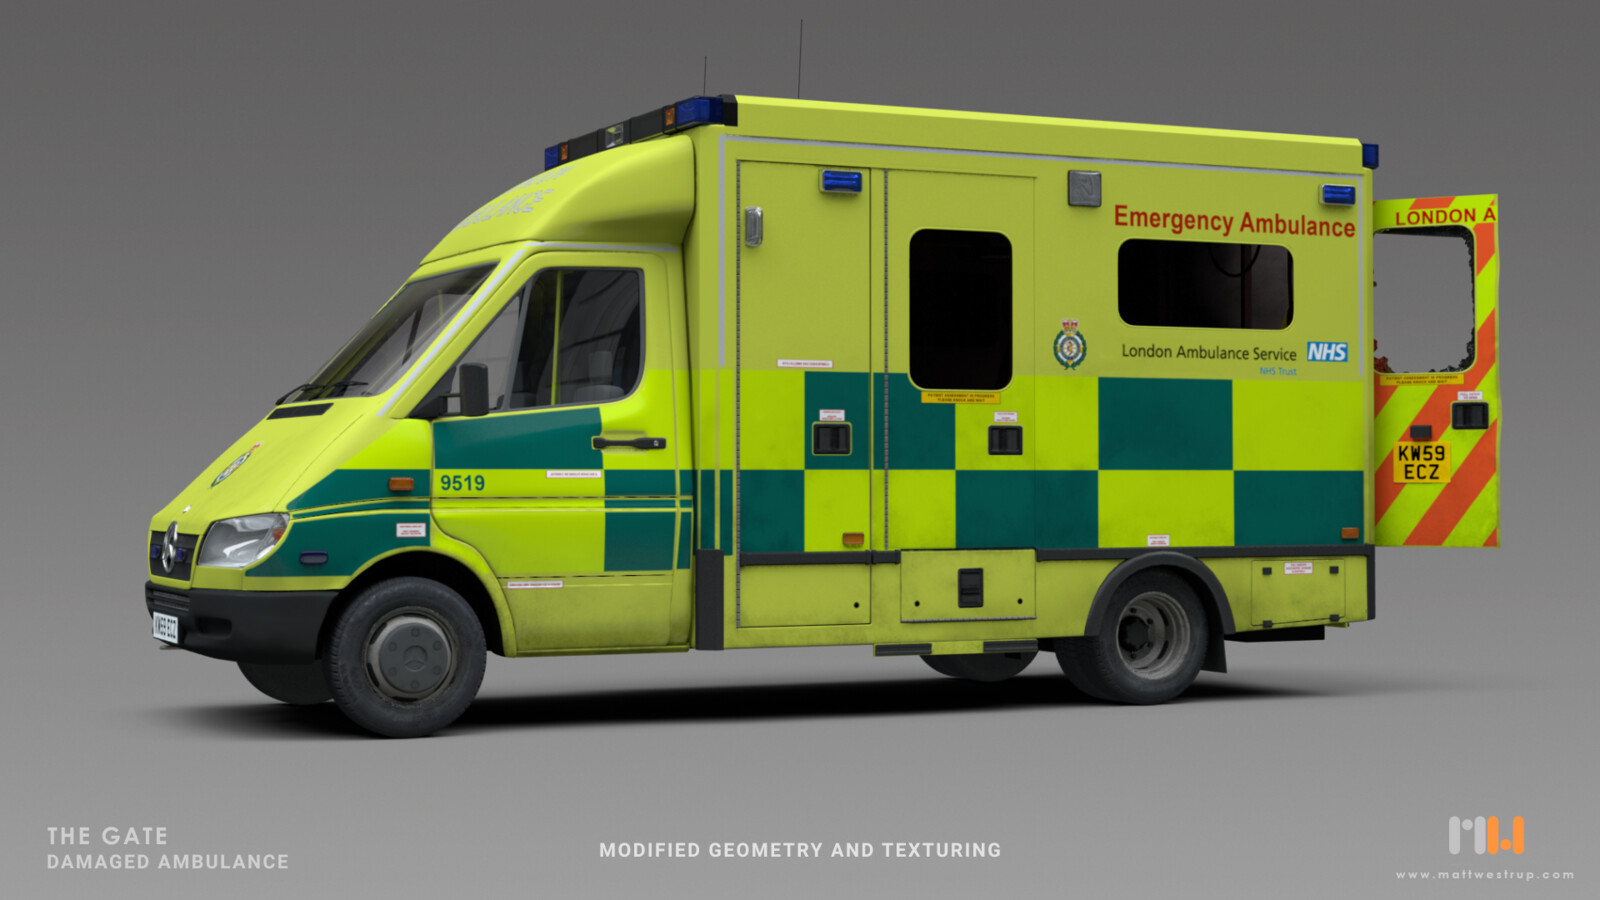 Ambulance - Role: Model conversion and texture.